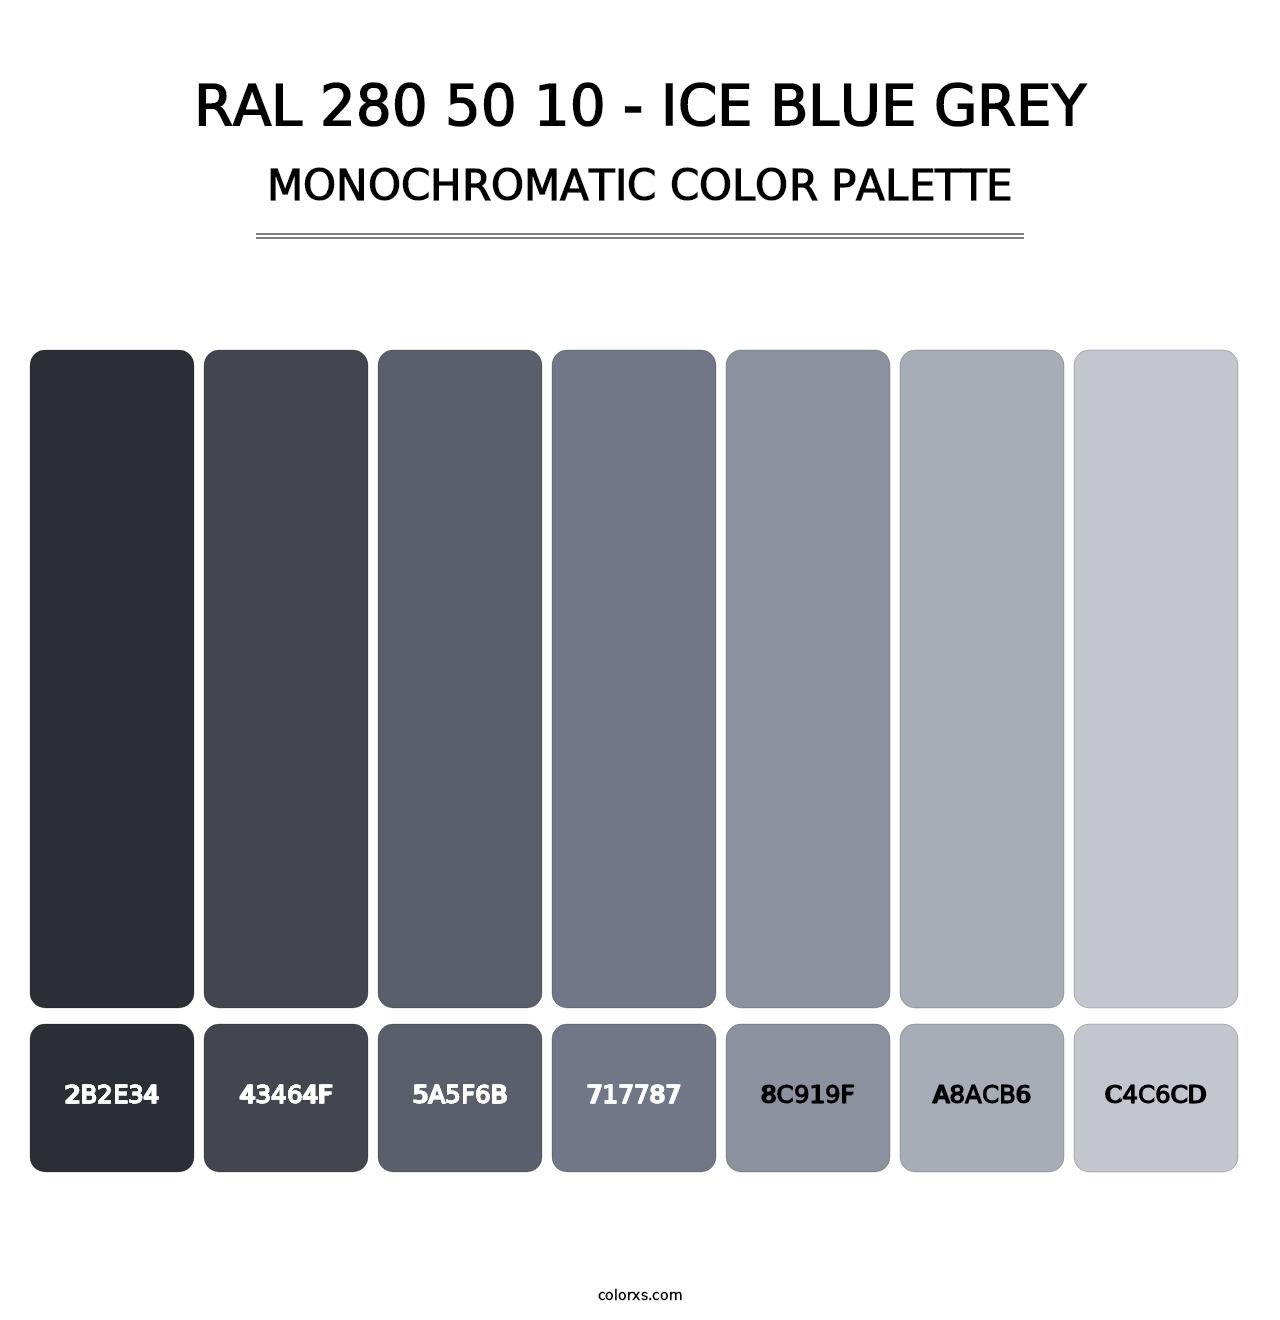 RAL 280 50 10 - Ice Blue Grey - Monochromatic Color Palette